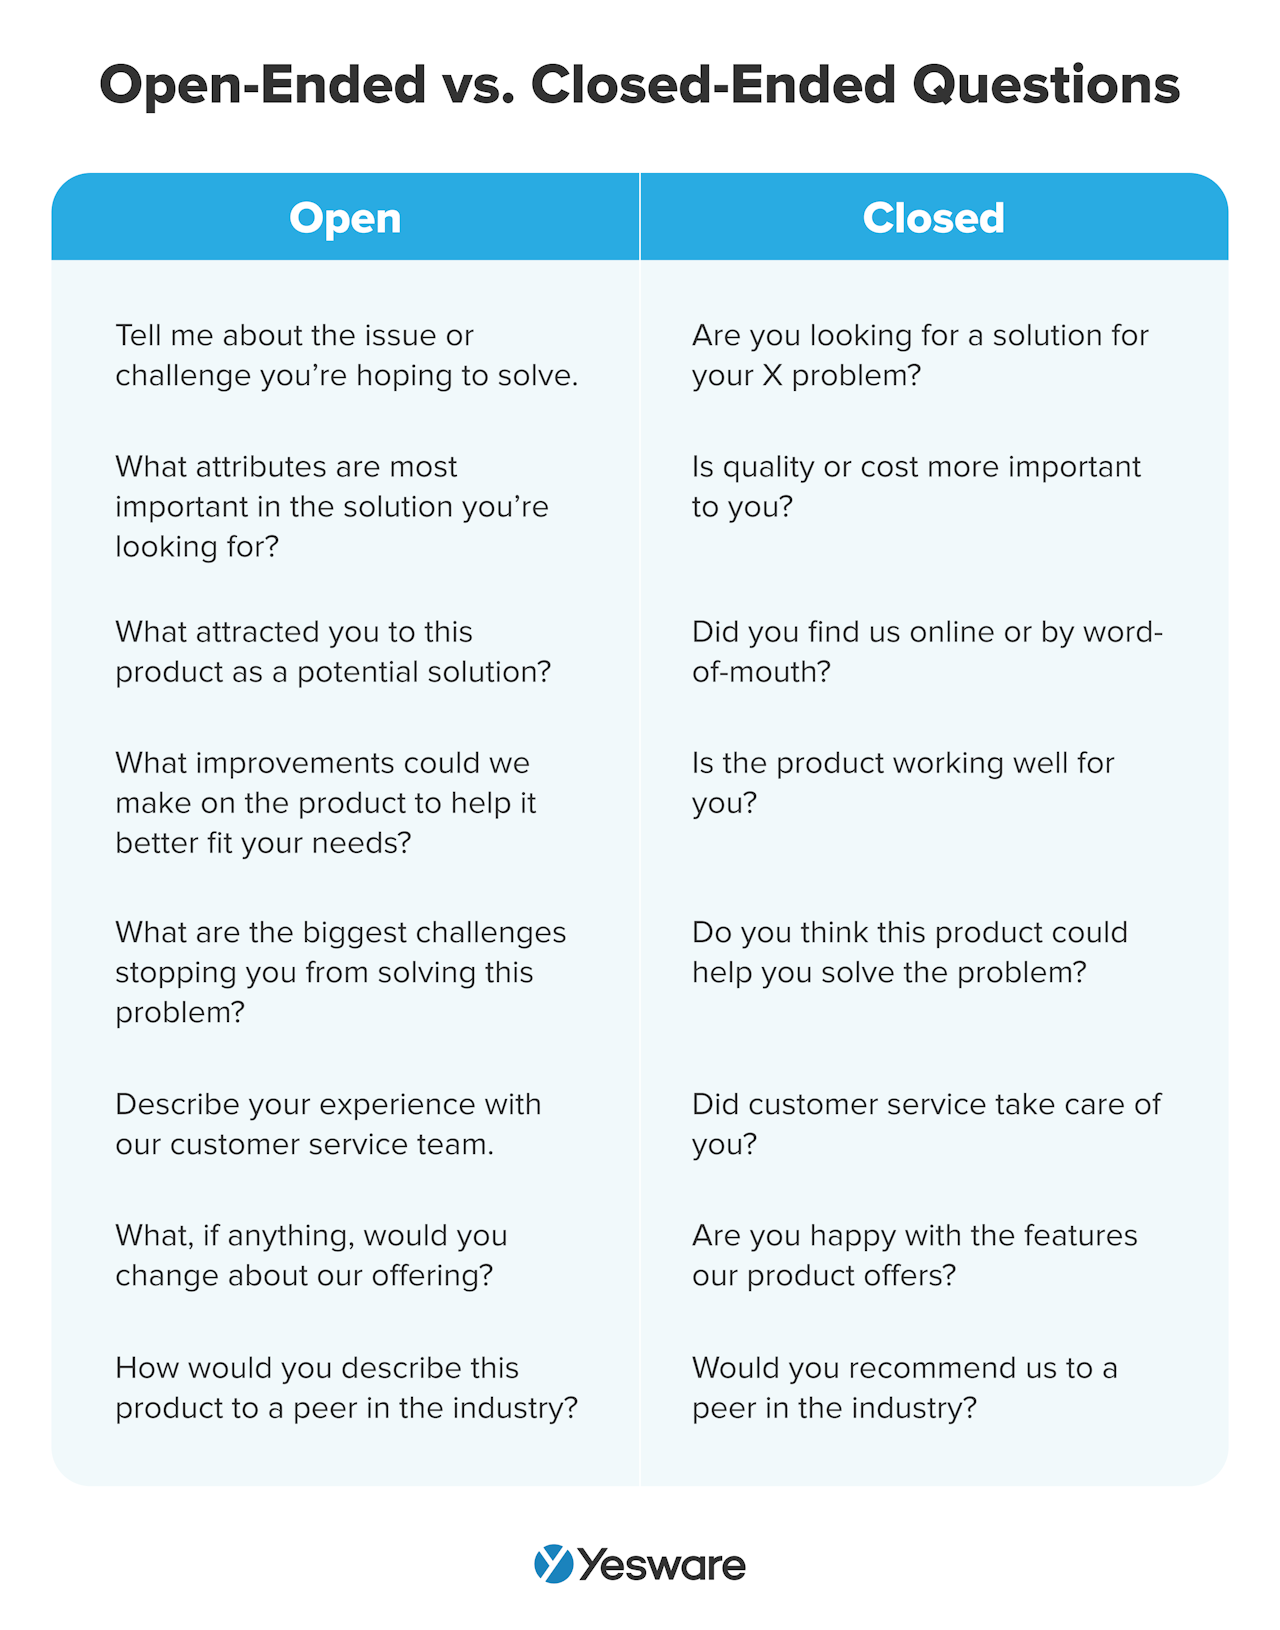 how to keep a conversation going: ask open-ended questions